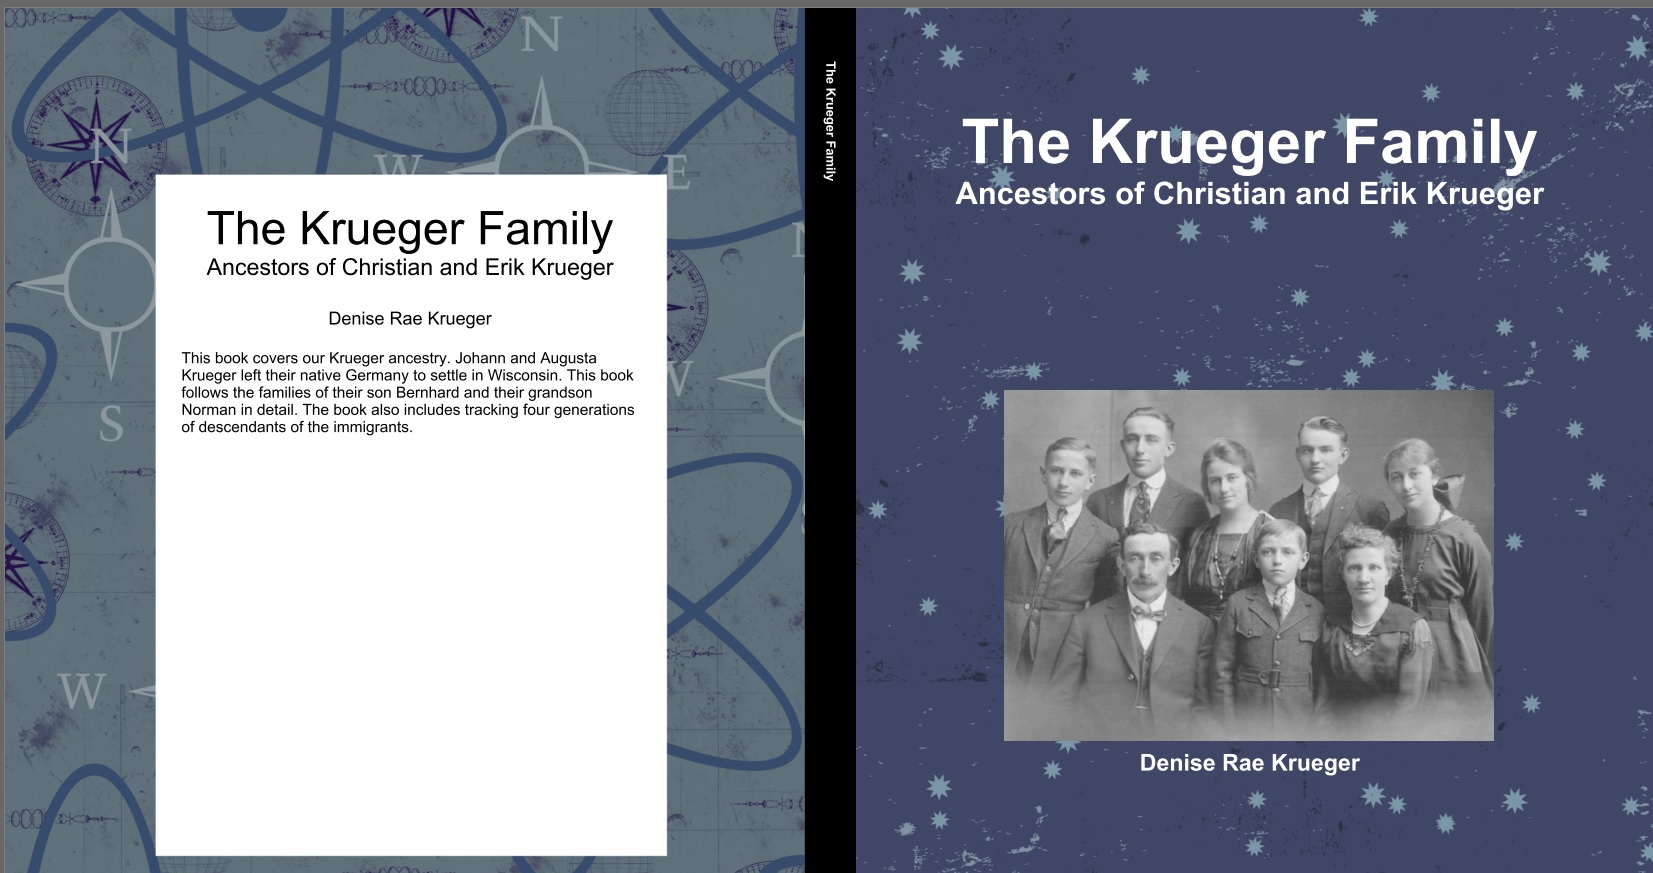 The Krueger book is published!